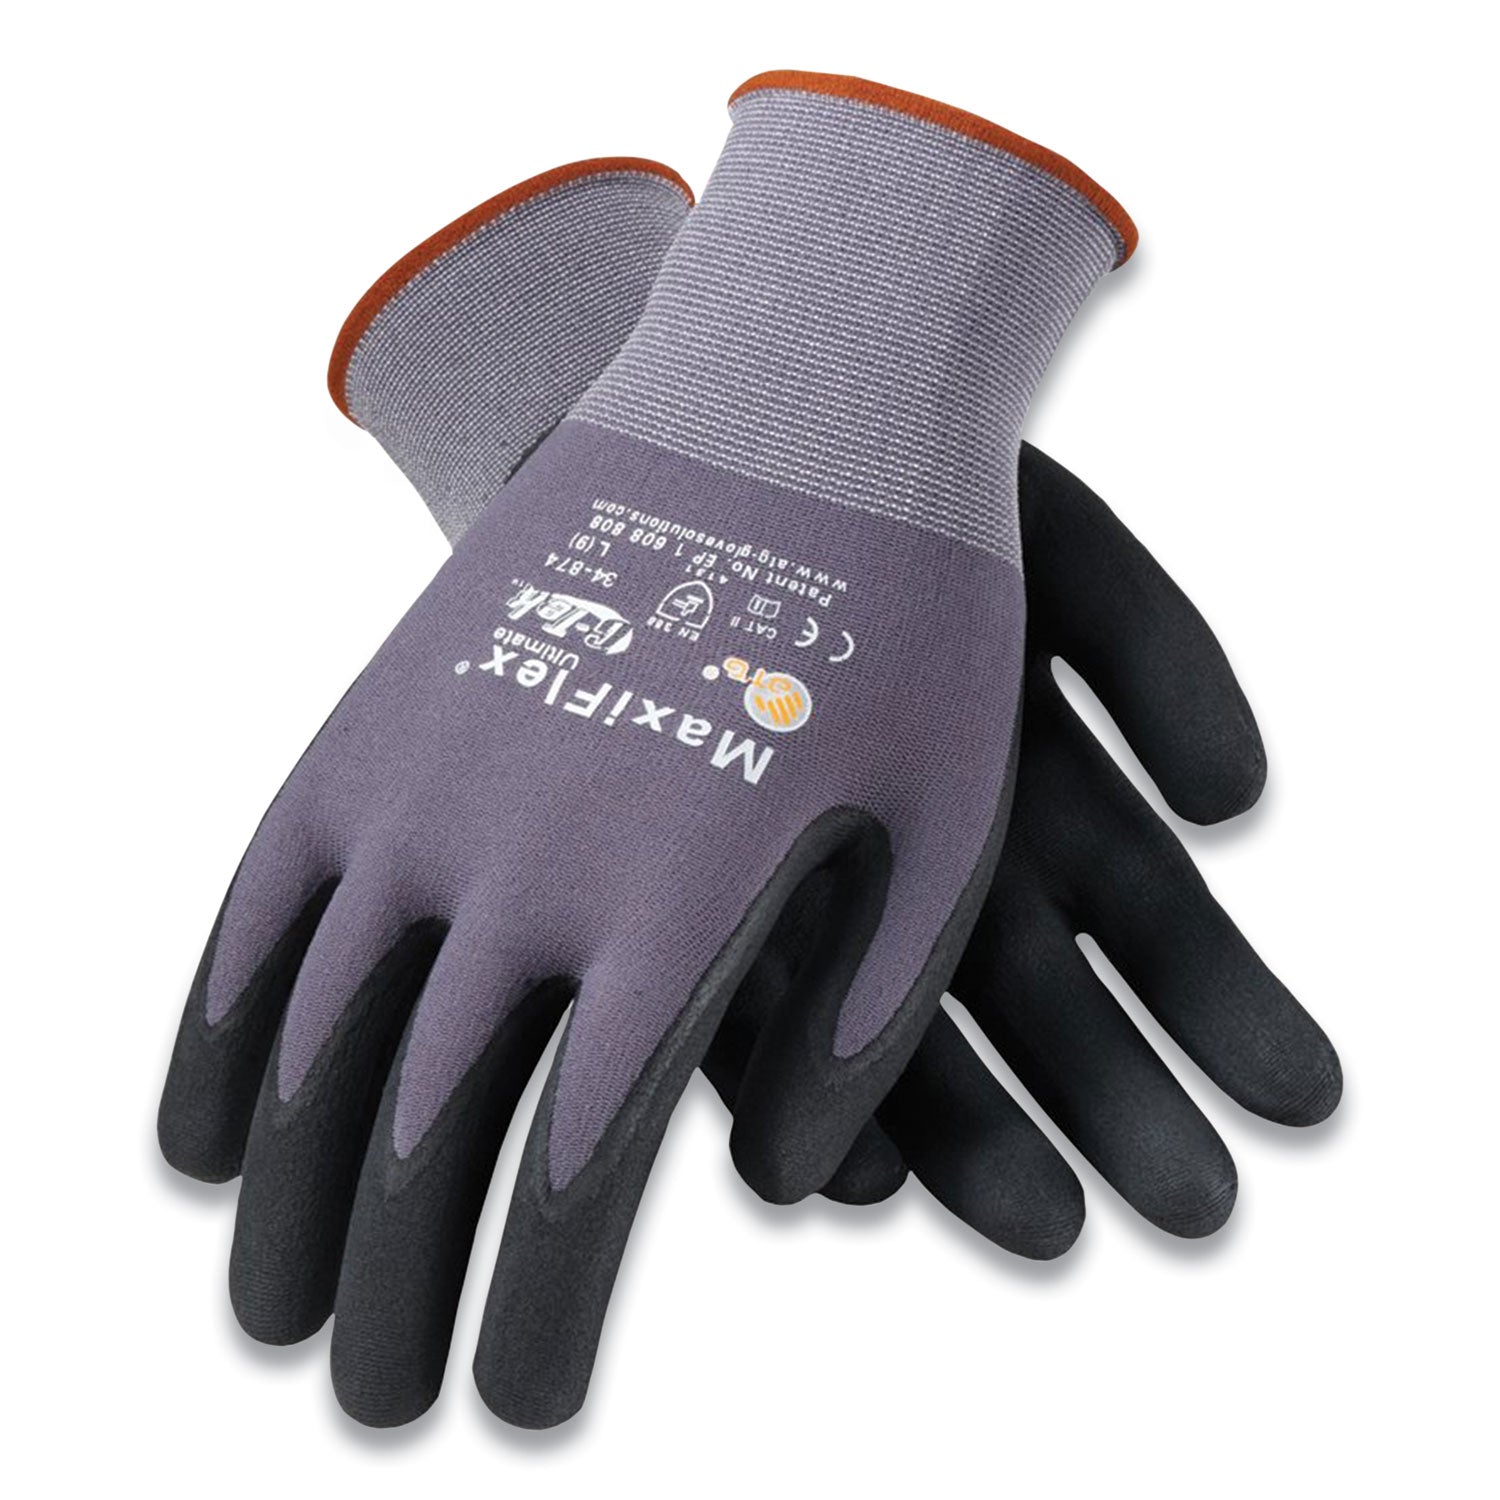 ultimate-seamless-knit-nylon-gloves-nitrile-coated-microfoam-grip-on-palm-and-fingers-large-gray-12-pairs_pid34874l - 1